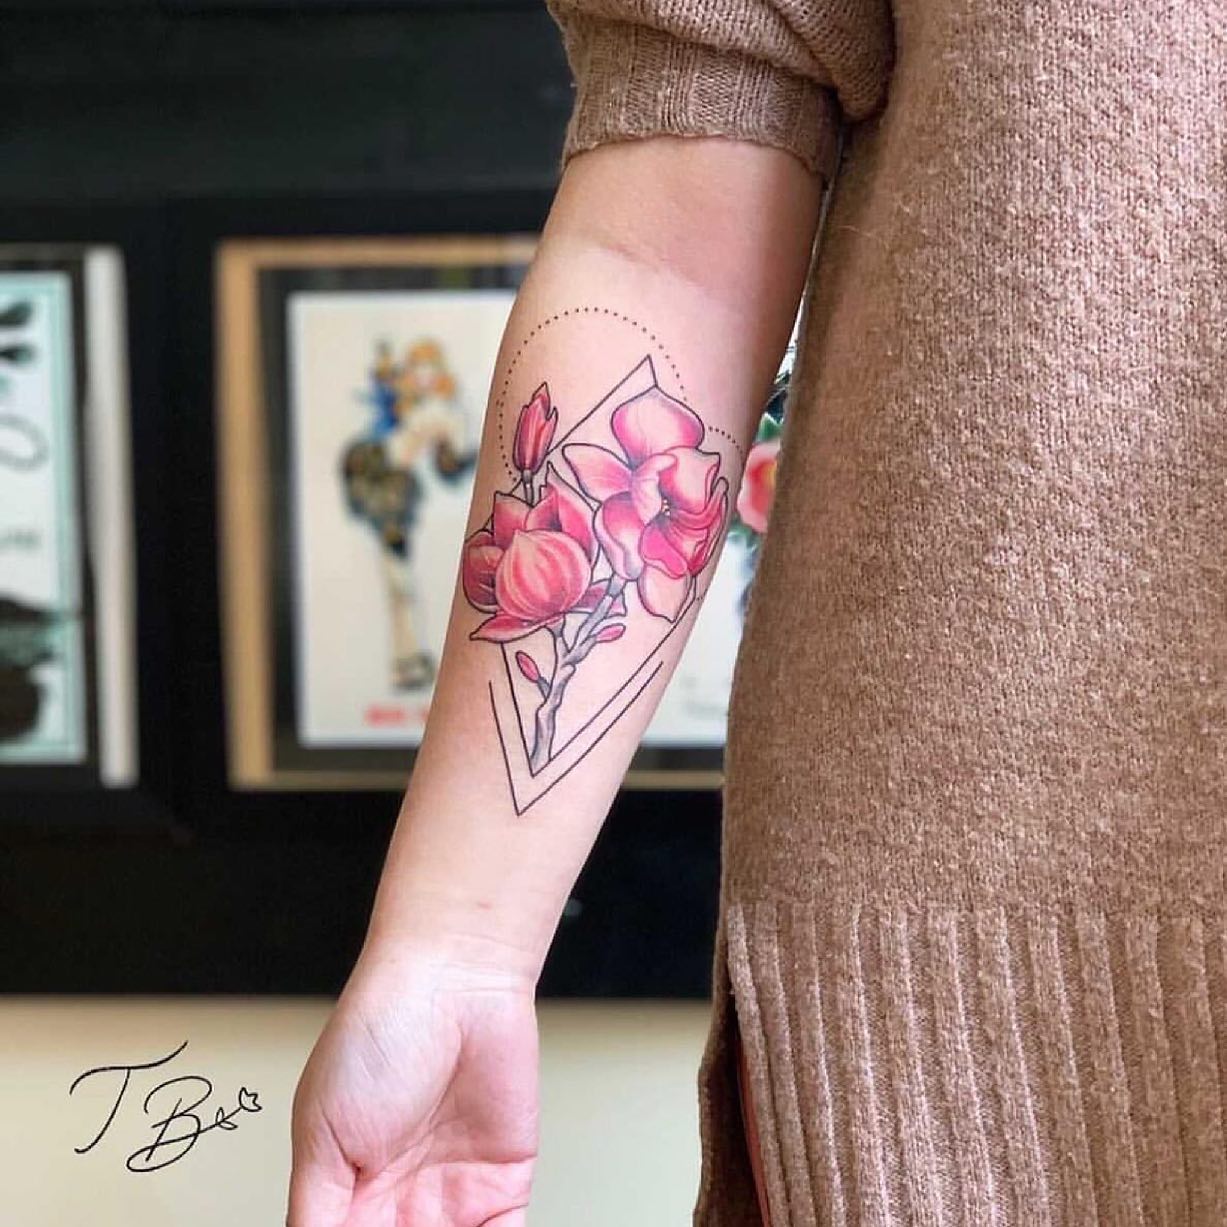 Gorgeous floral tattoo by the lovely thaisblanc 🌸💖

If you would like to get tattooed, then please fill out the tattoo enquiry form on our website 💫

                         totaltattoo barber_dts easytattoo_uk eternalink dynamiccolor lockdownneedle stencilstuff       